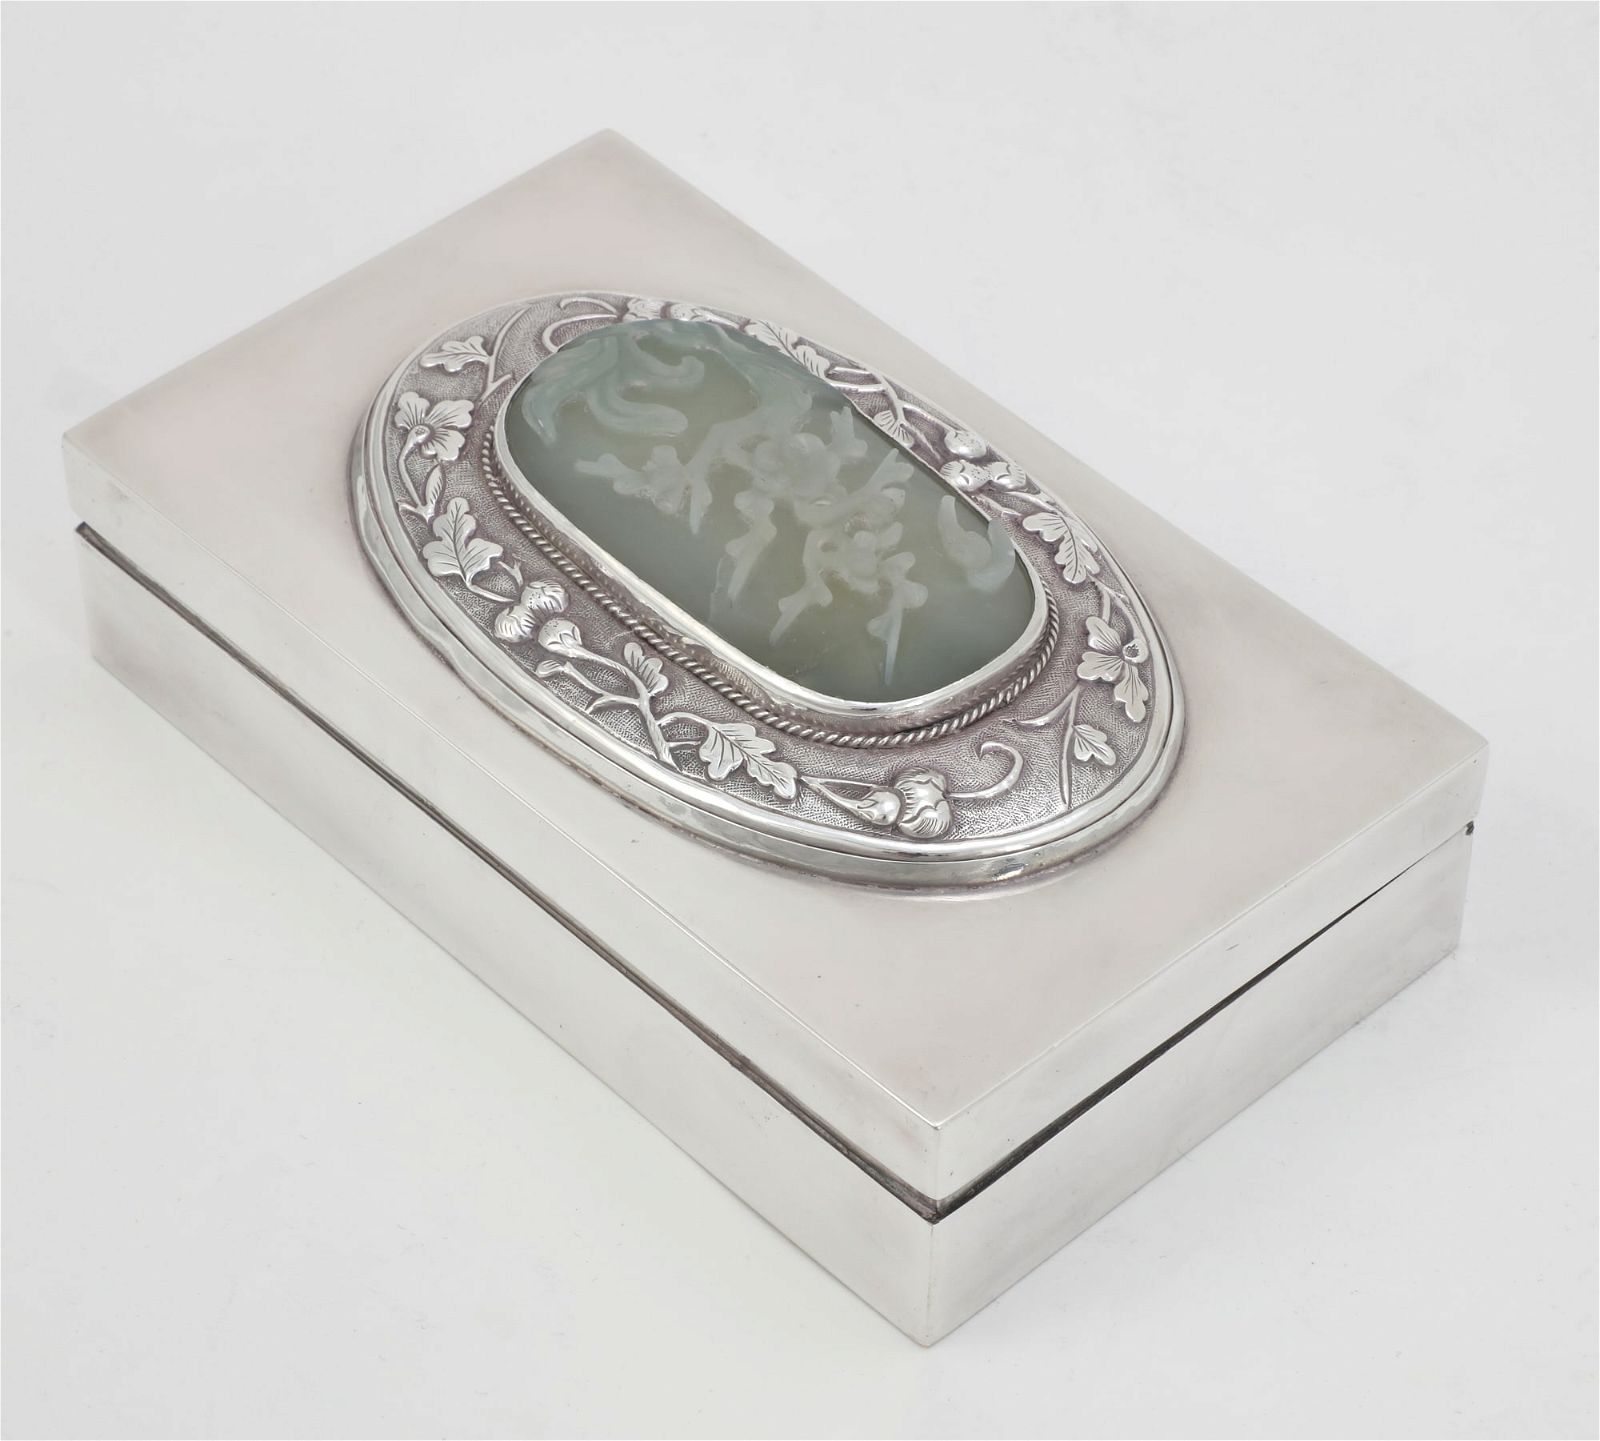 A CHINESE JADE PLAQUE IN A SILVER 2fb3072